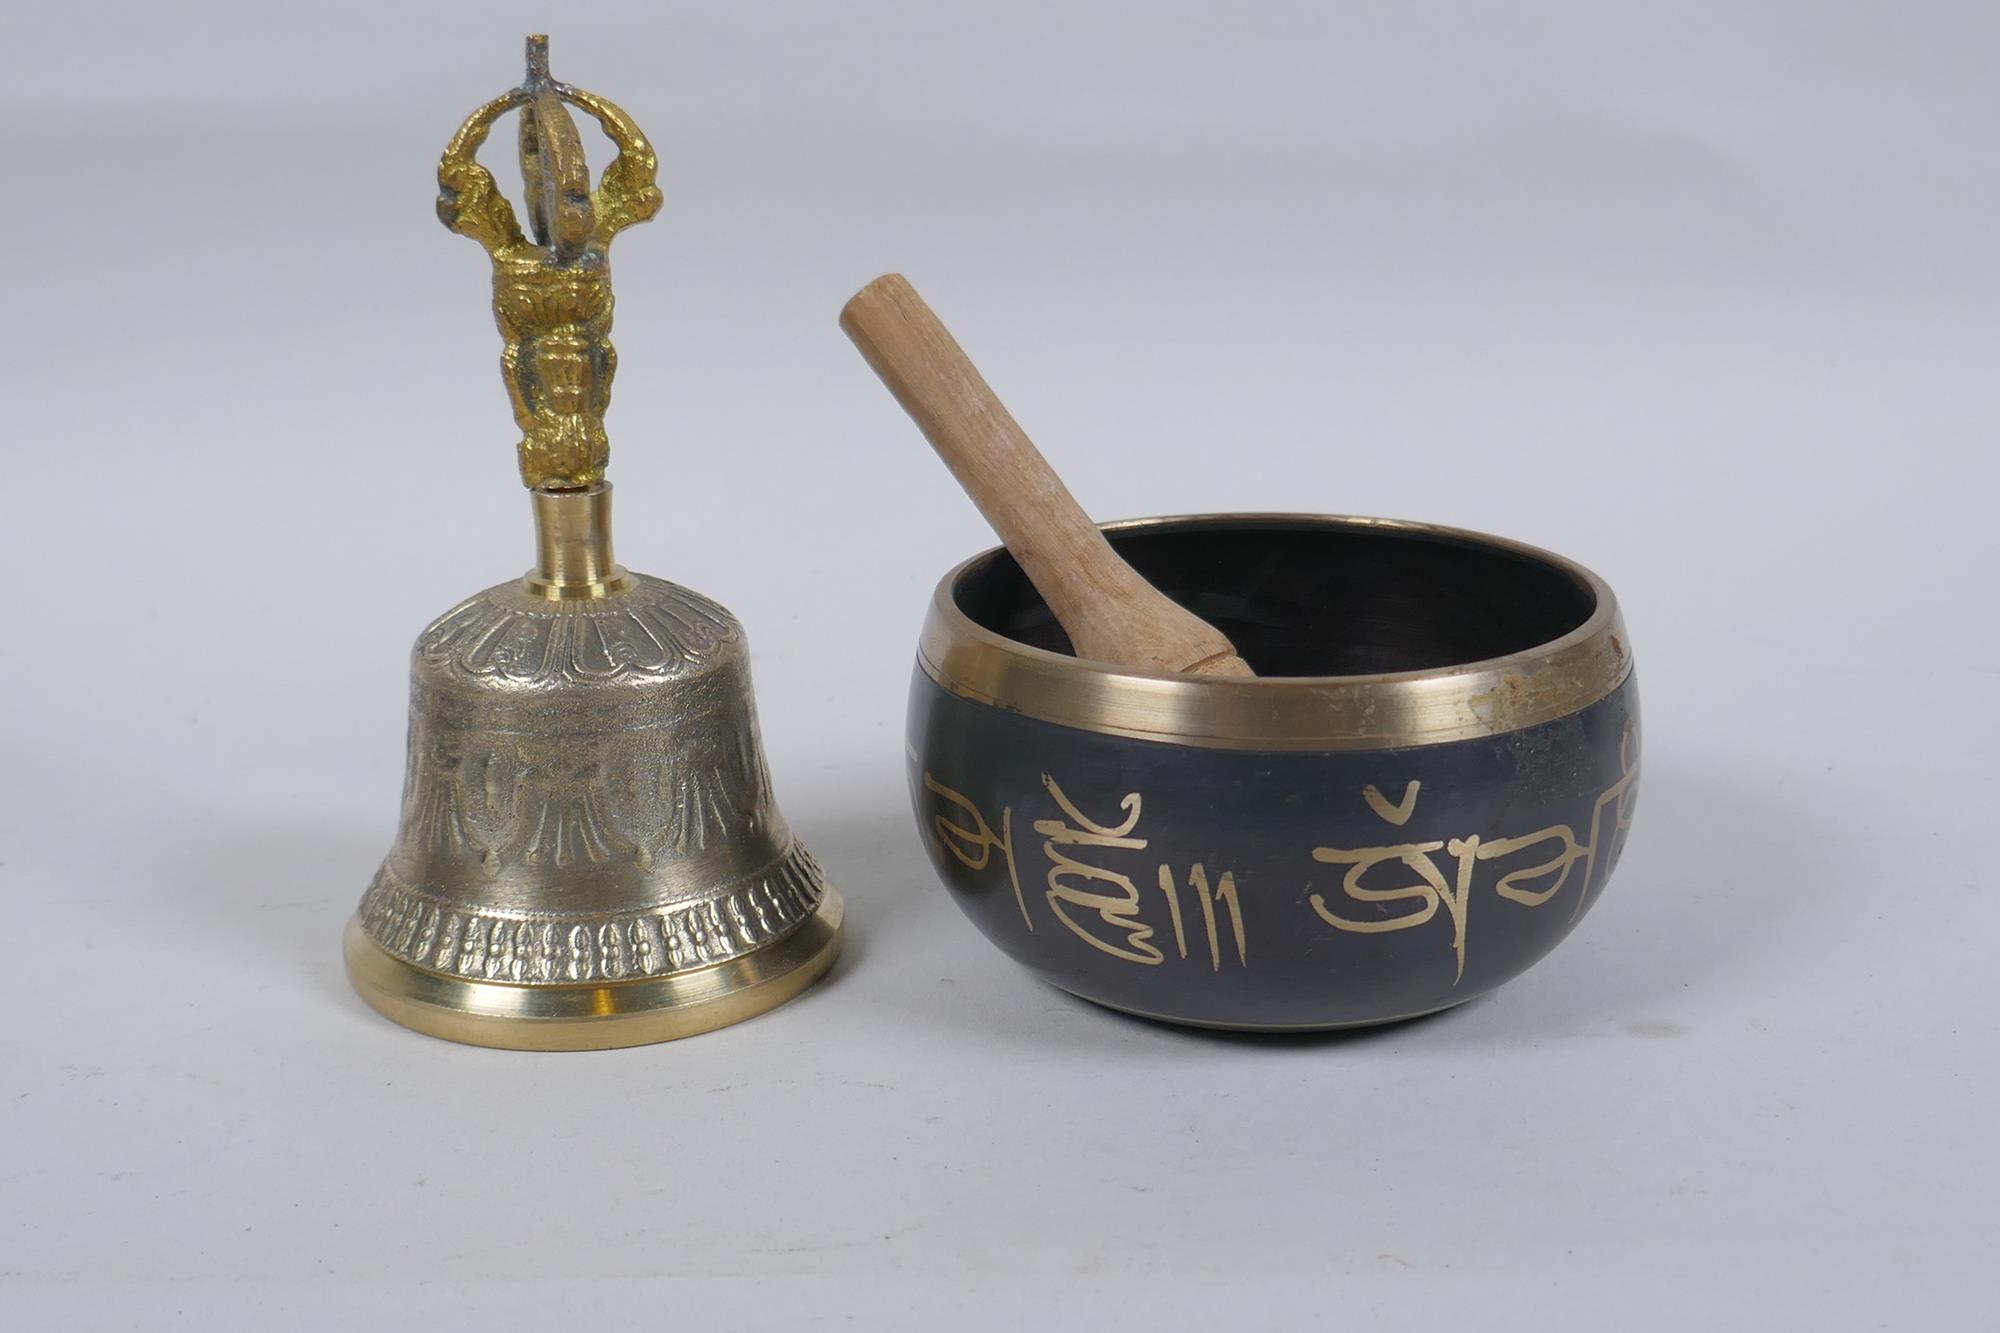 A Tibetan bronze singing bowl with script decoration and wood beater, and a brass ceremonial bell